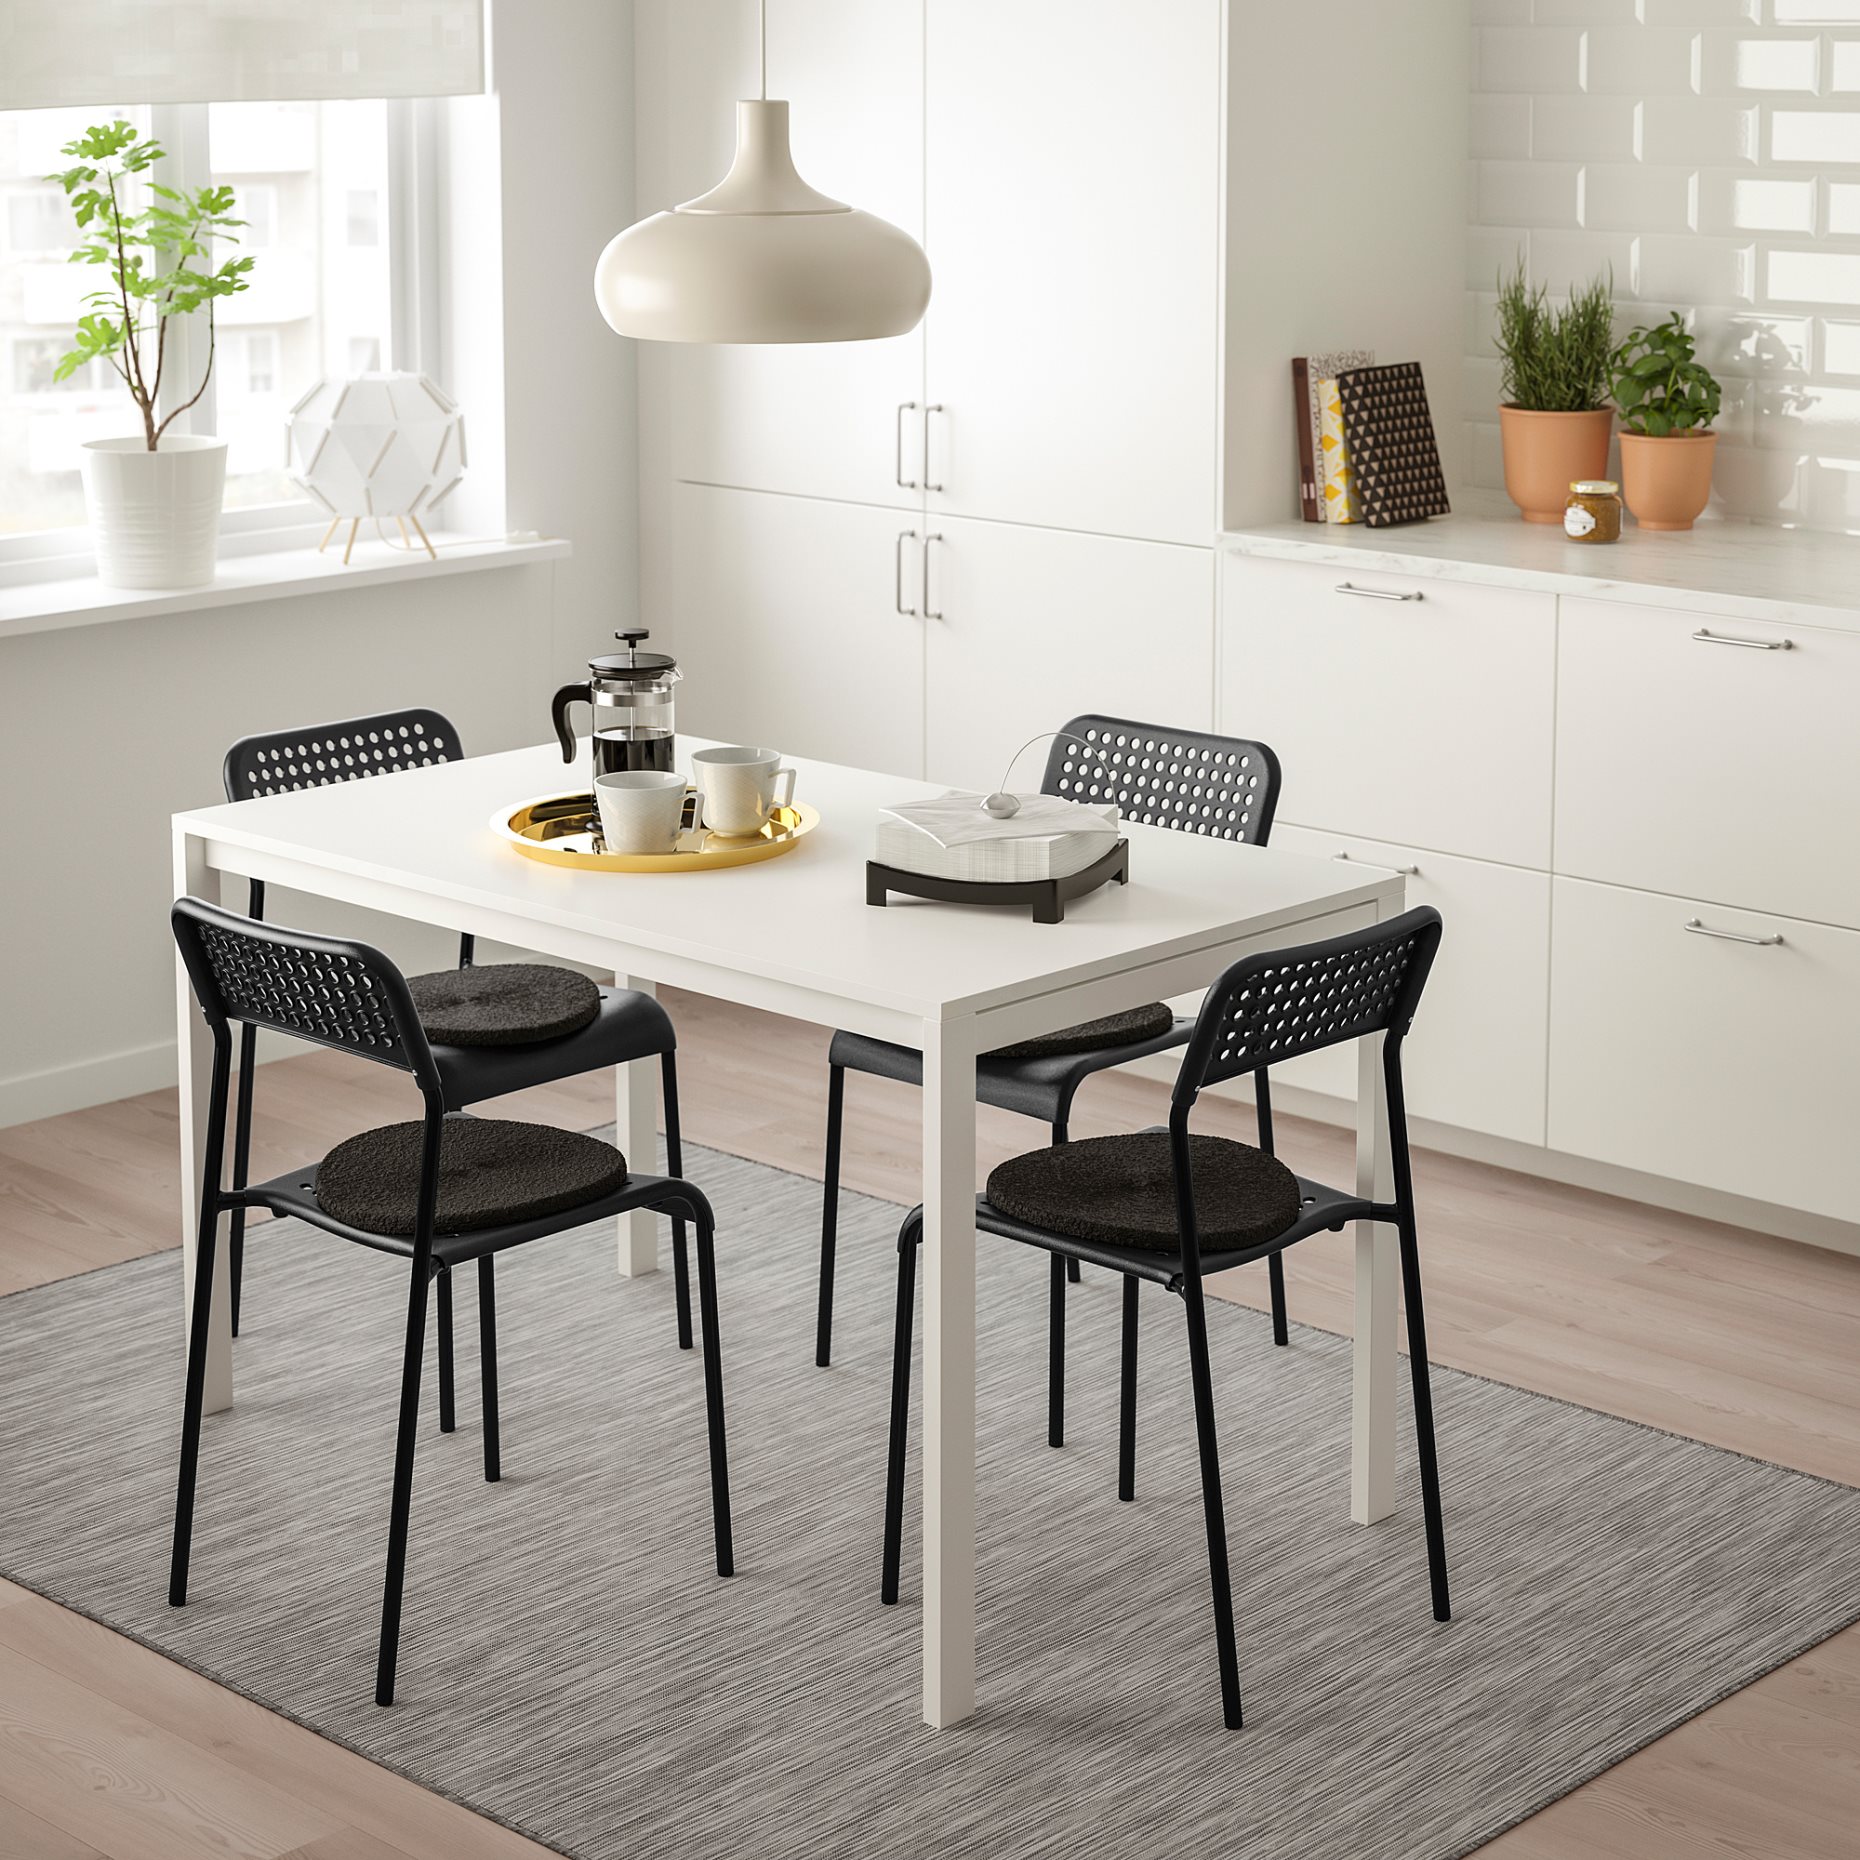 MELLTORP/ADDE, table and 4 chairs, 791.614.86